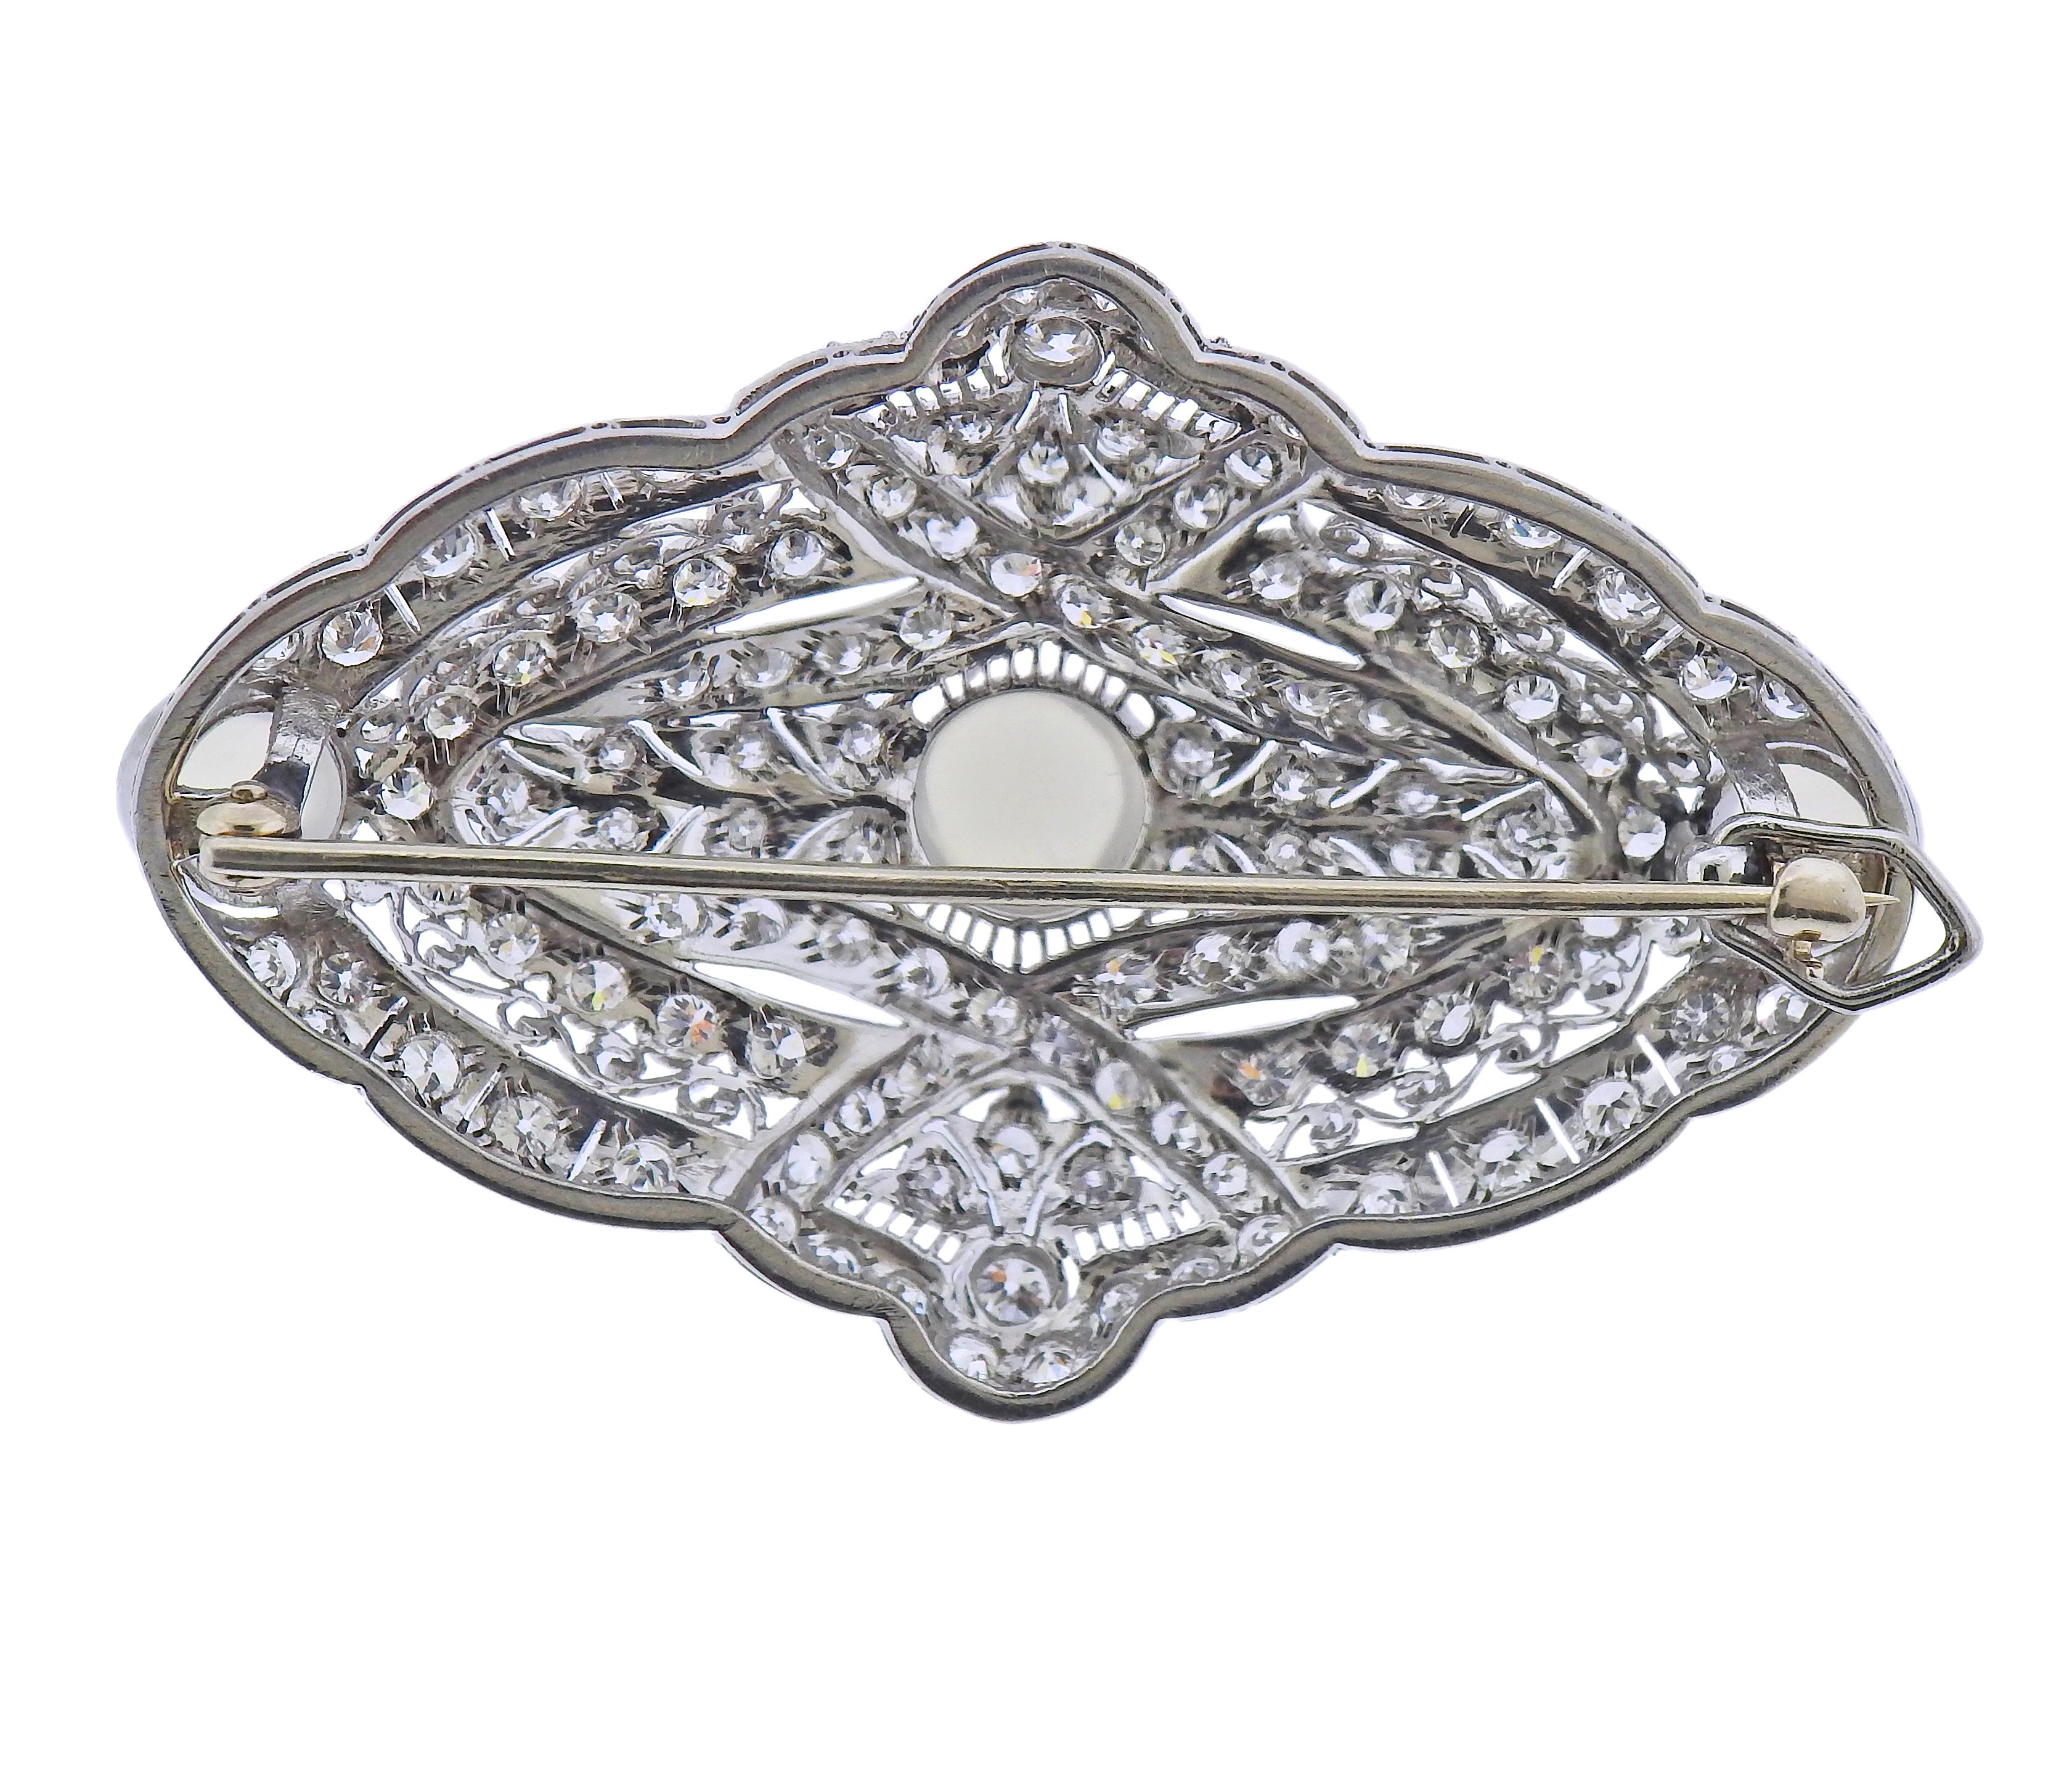 Platinum Art Deco brooch/pendant, set with 3 moonstones - 6.6mm to 8.5mm, surrounded with approx. 3.50ctw in diamonds. Brooch measures 56mm x 36mm. Tested plat. Weight - 21.6 grams.